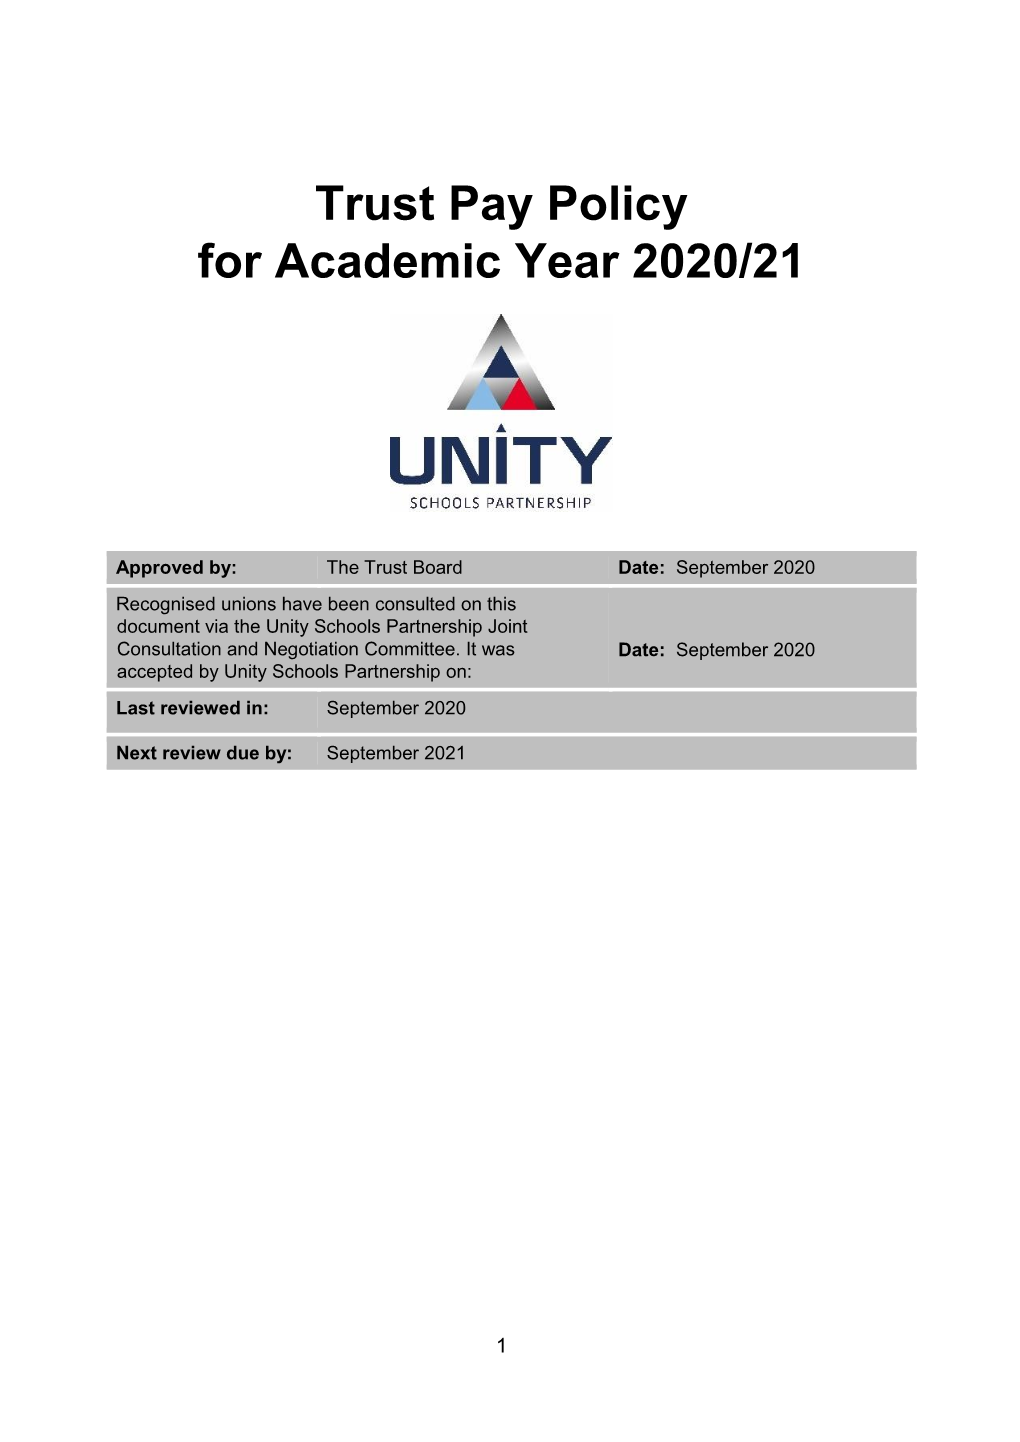 Trust Pay Policy for Academic Year 2020/21